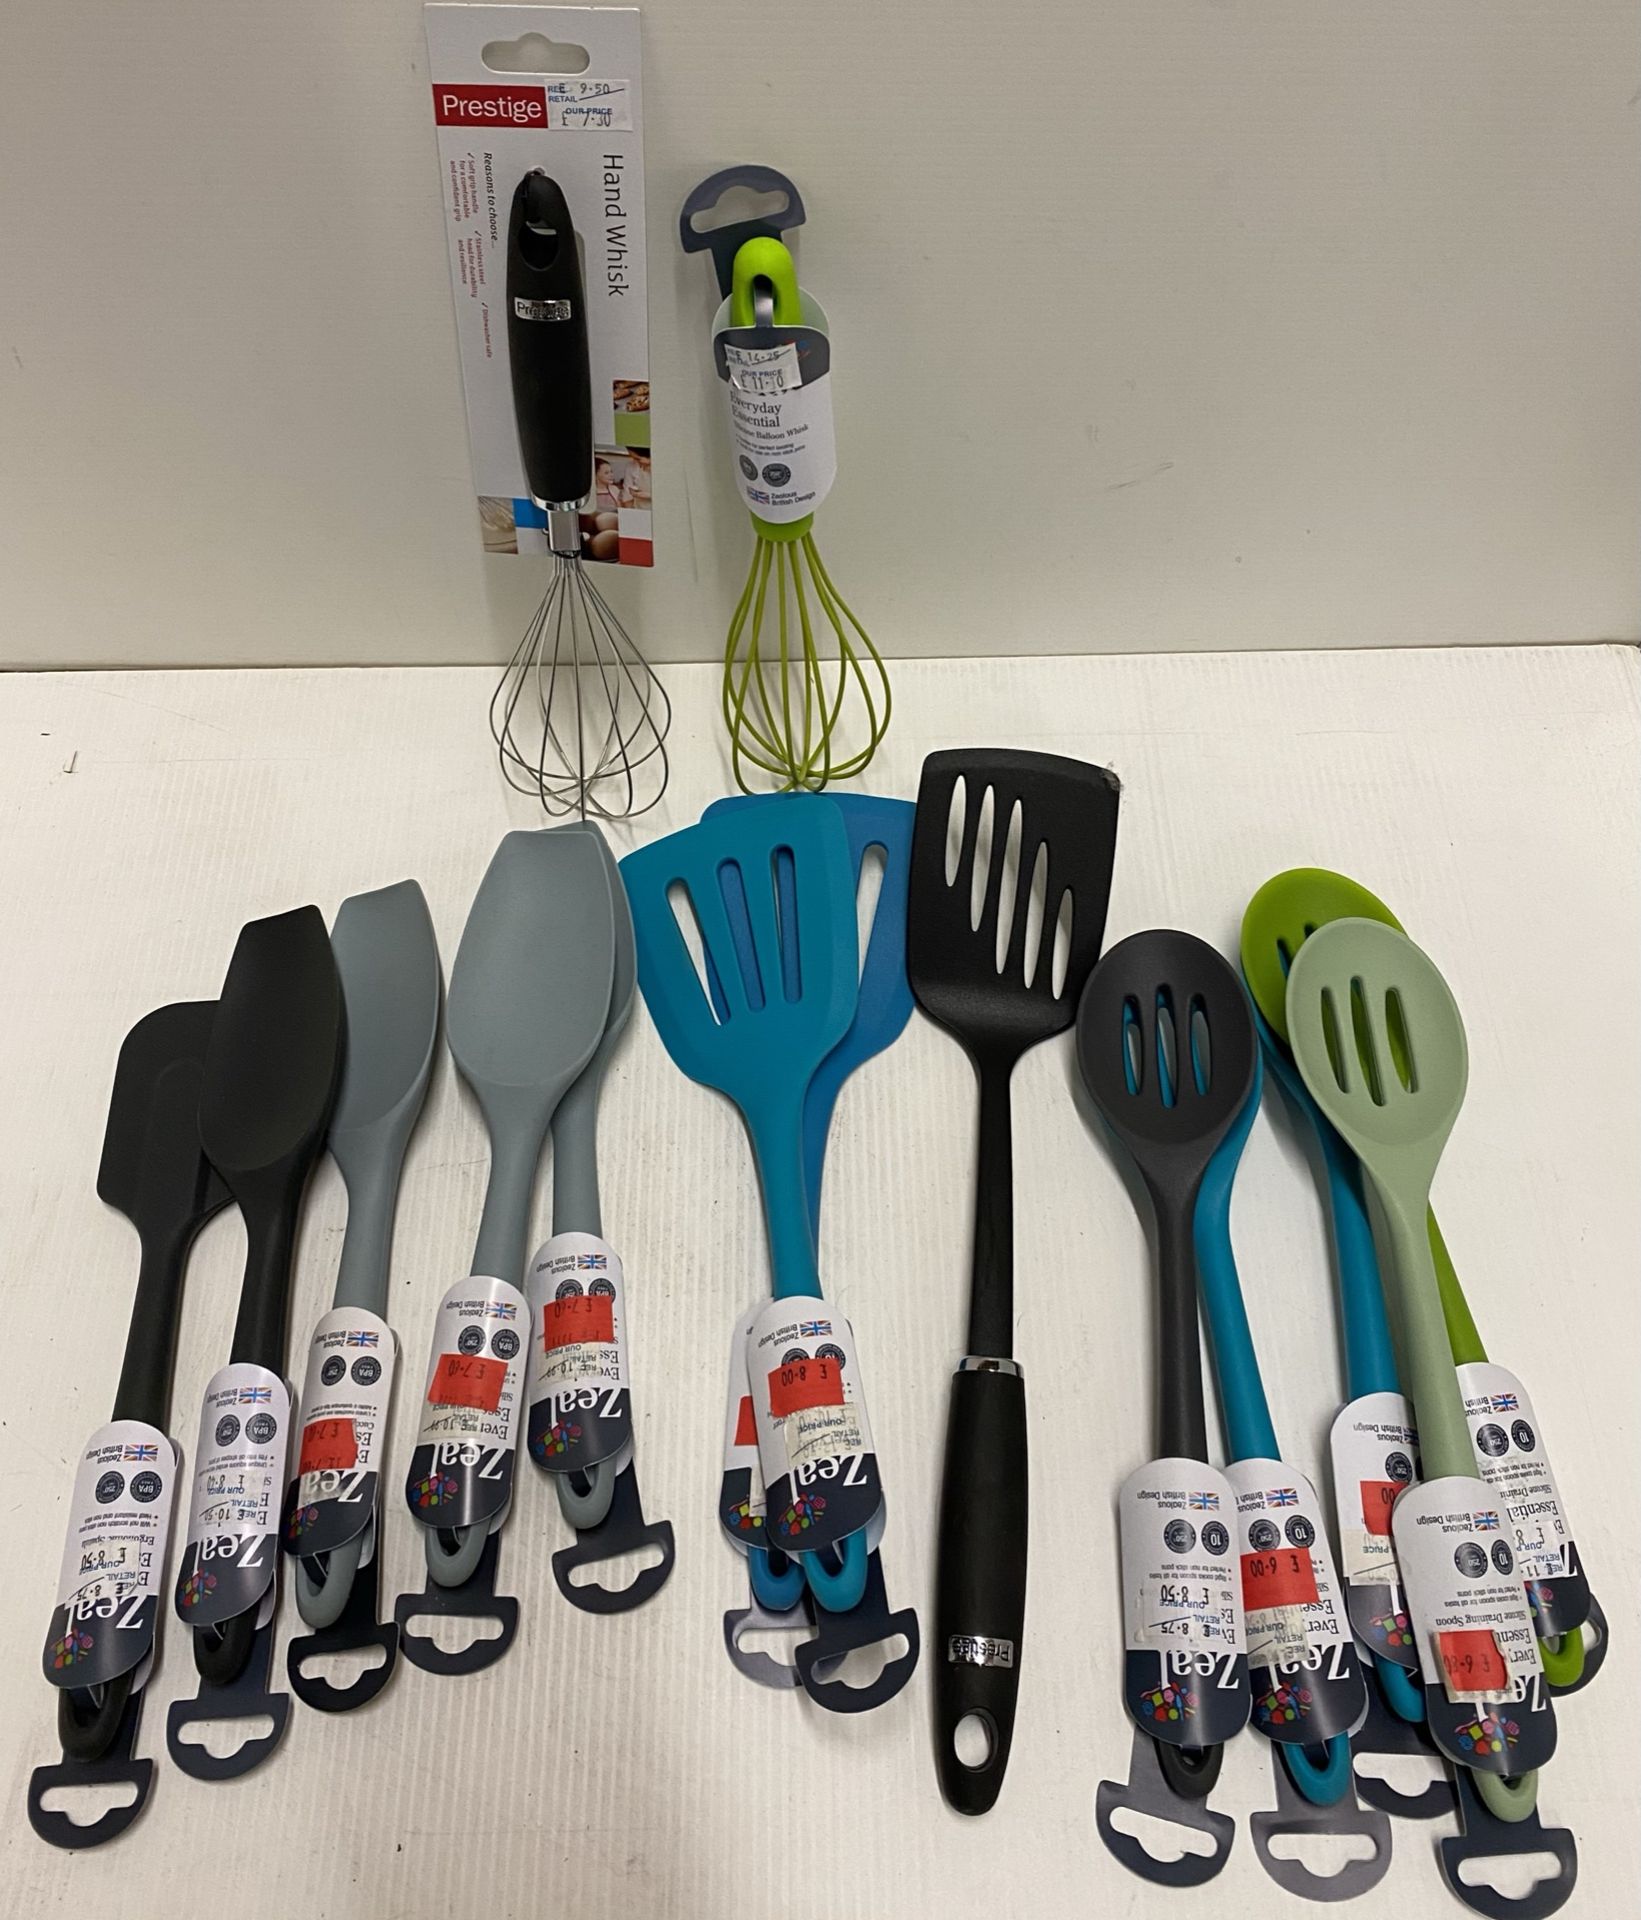 15 x assorted kitchen utensils by Prestige and Zeal - RRP £7-£10.